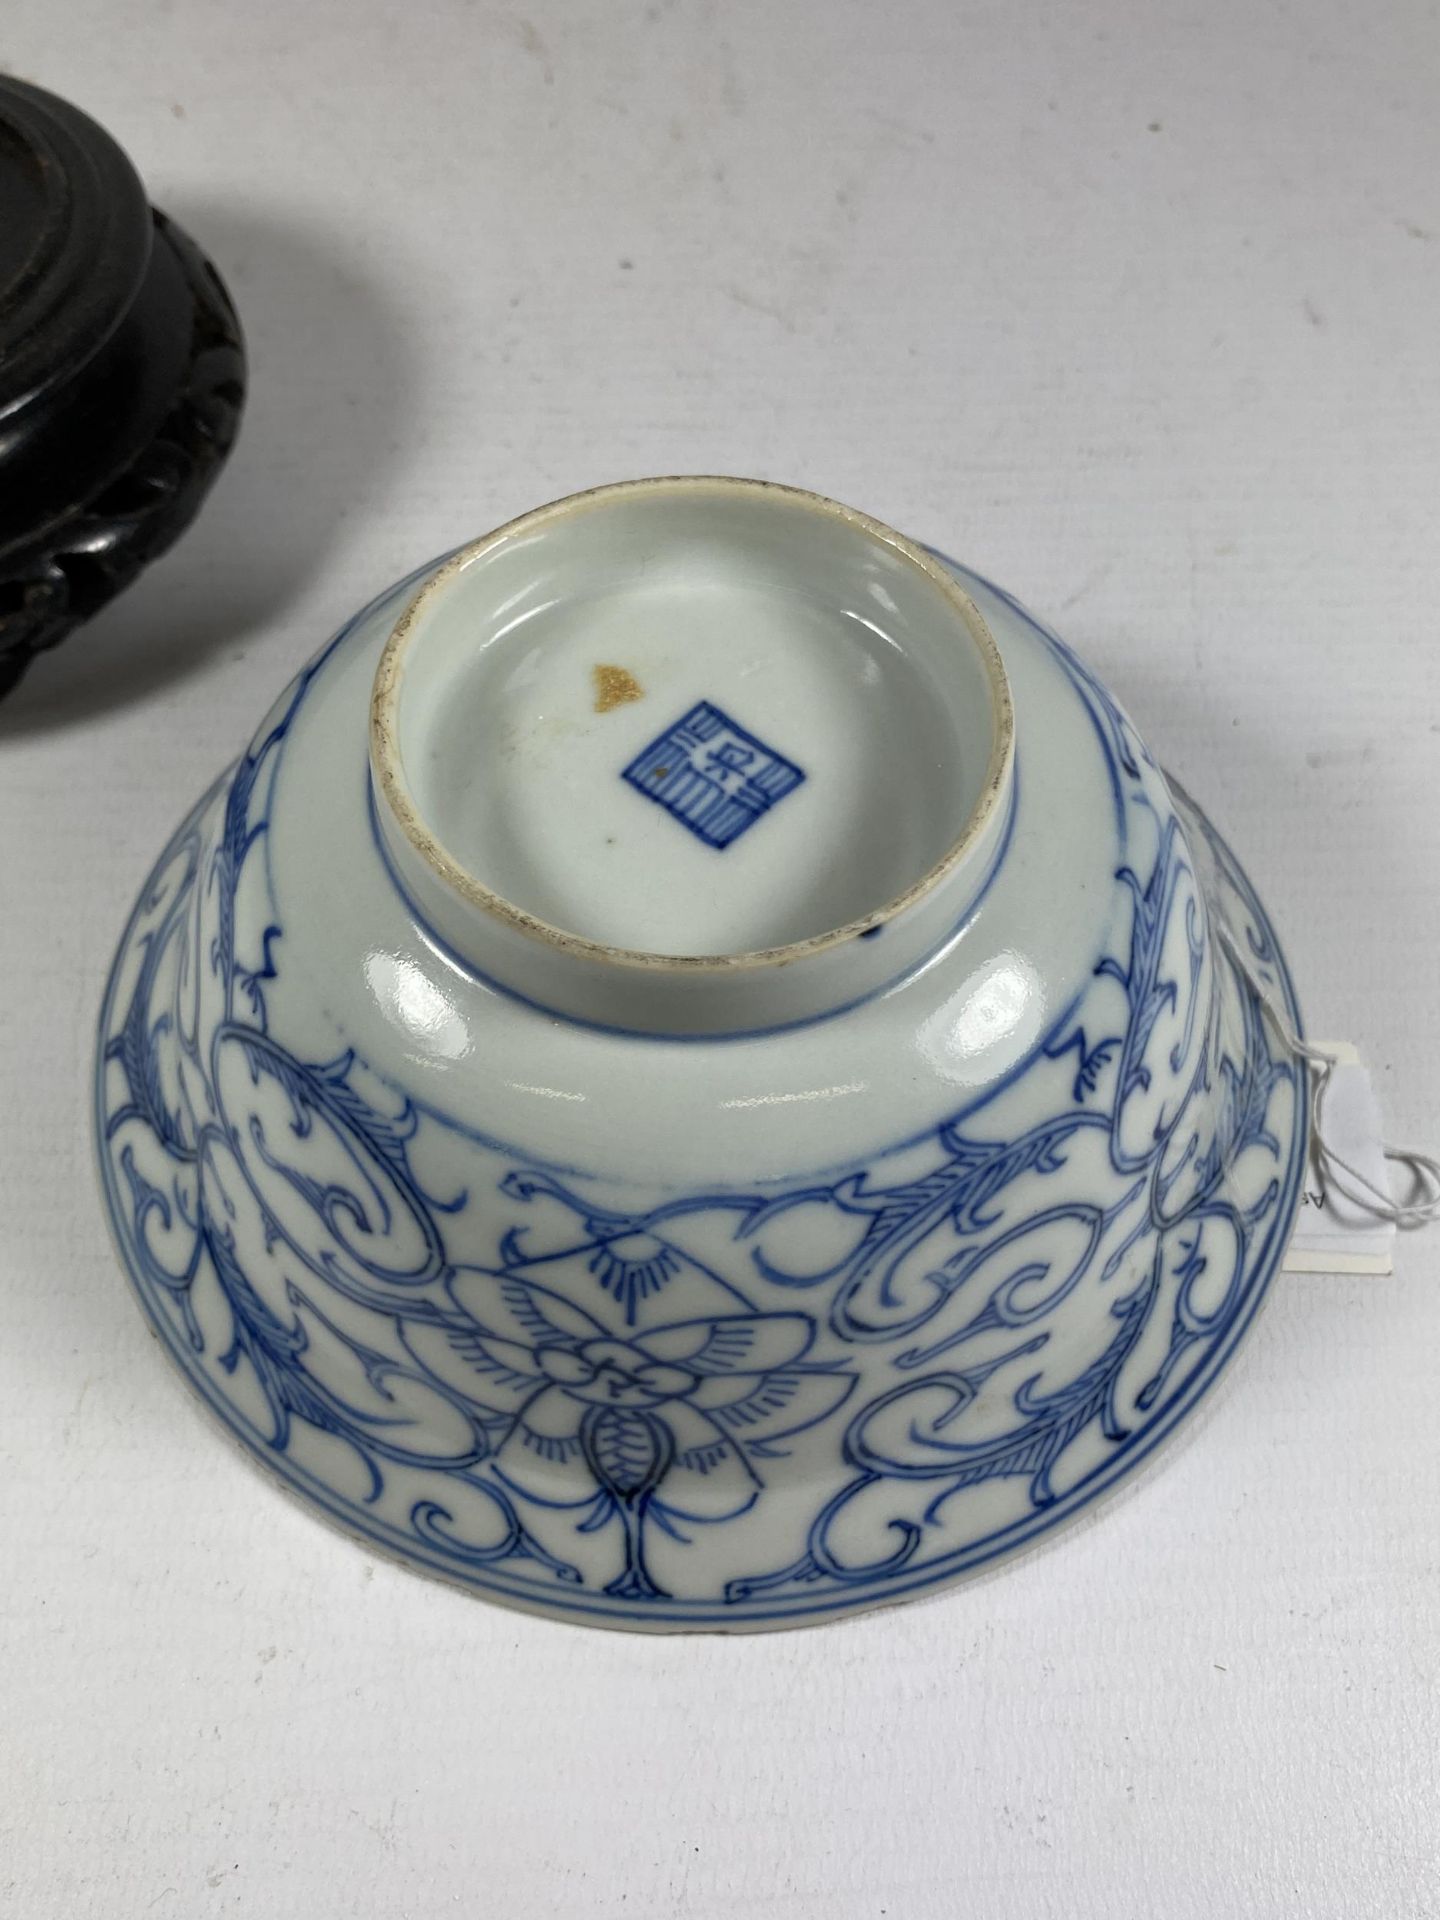 A MID-LATE 19TH CENTURY CHINESE QING TONGZHI PERIOD (1862-1874) BLUE & WHITE PORCELAIN BOWL ON - Image 4 of 6